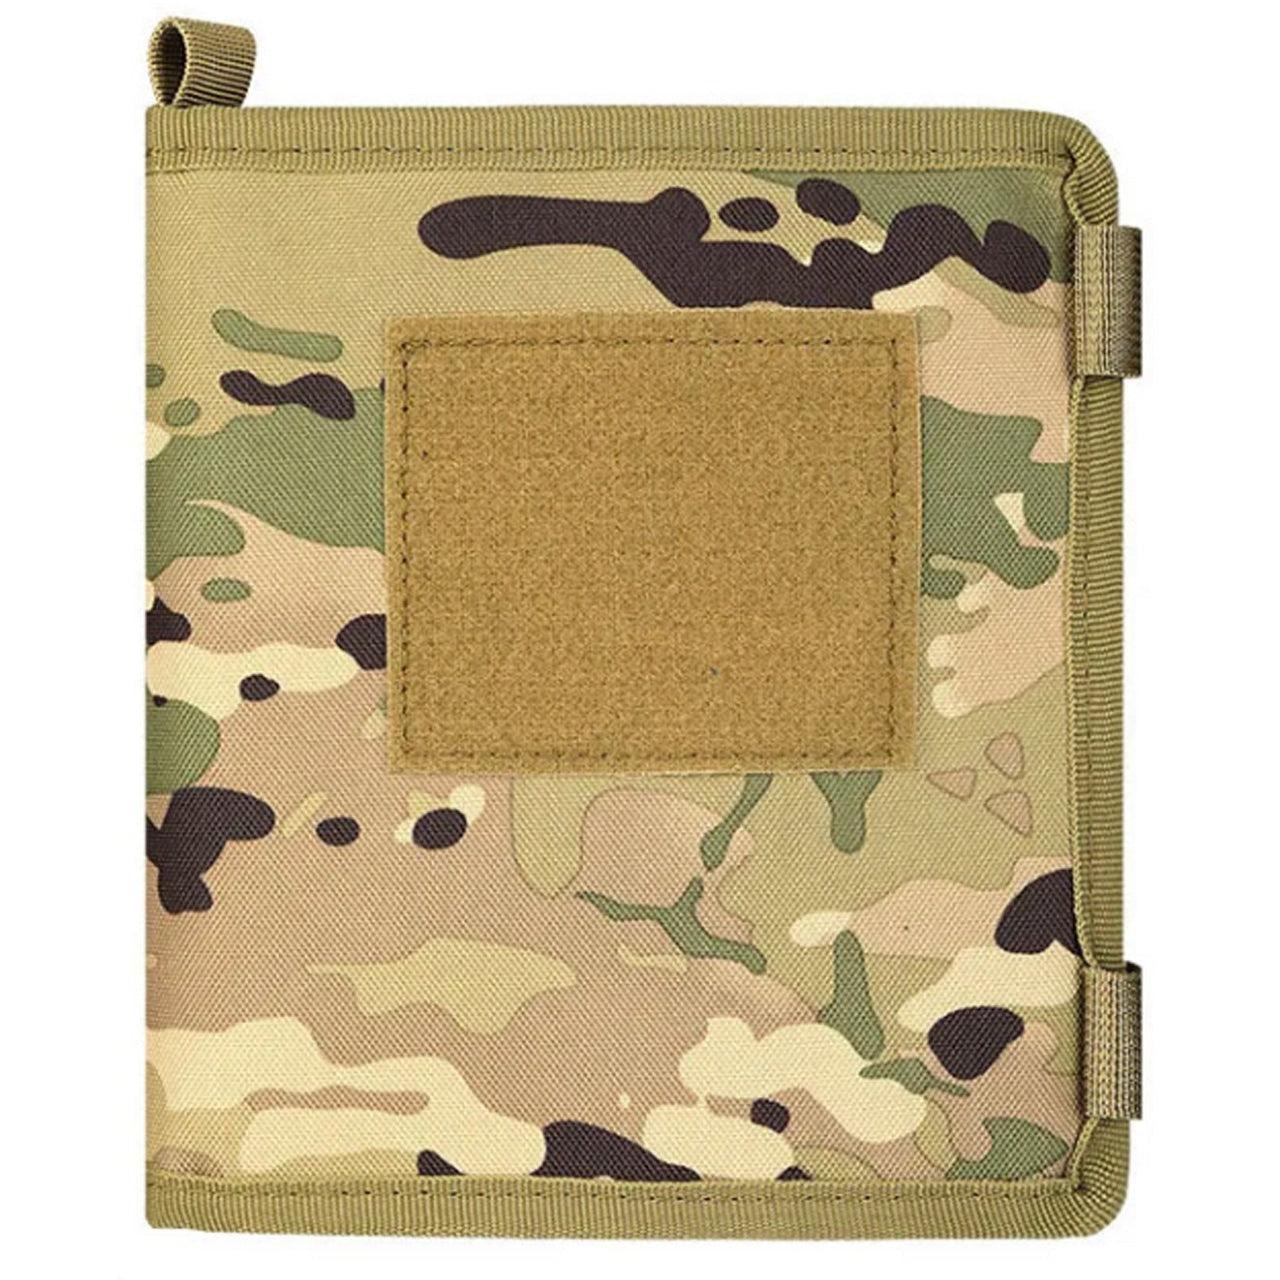 Discover this deluxe field administration case boasting features like a removable map protector, full-length rear document pocket, and storage for your maps, compass, and other admin tools. front cover www.moralepatches.com.au